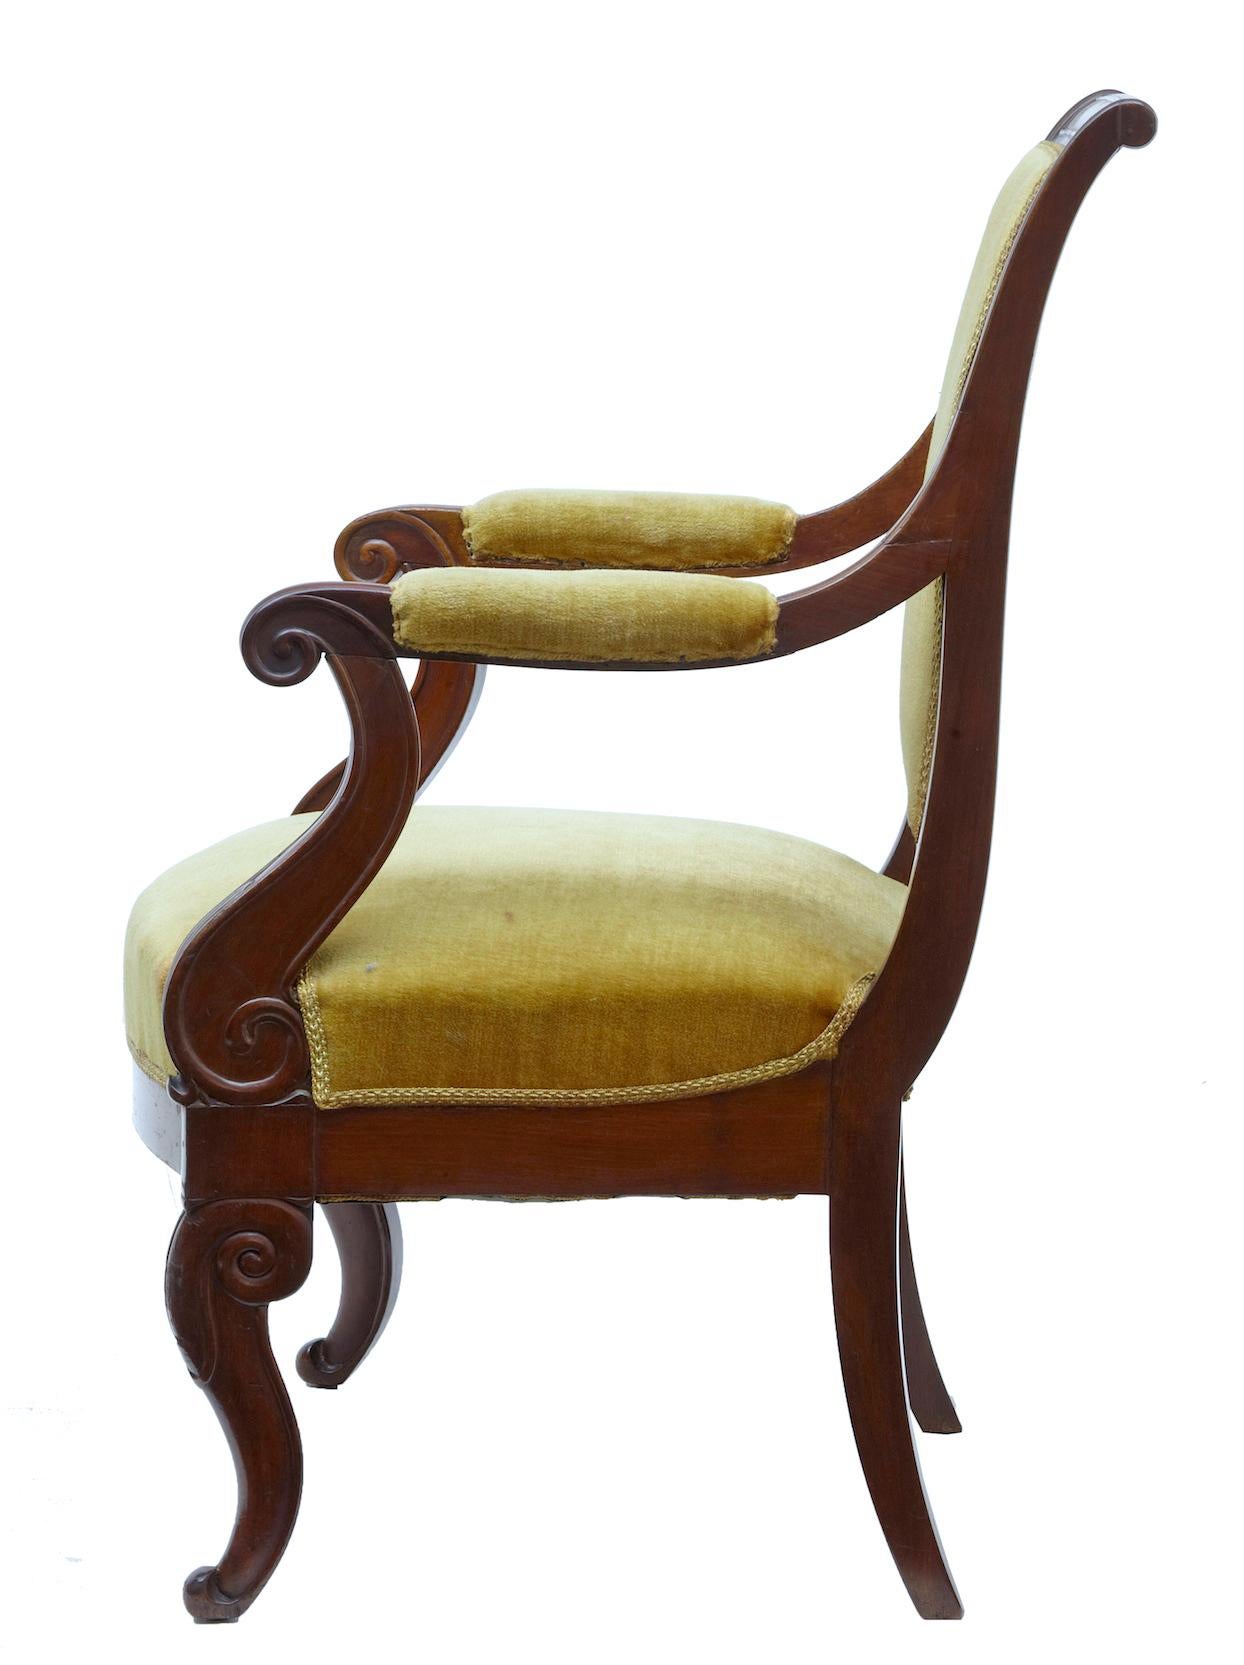 19th century French Empire revival mahogany armchair, circa 1840.

Single French armchair made in mahogany. Shaped back linking to the padded armrests and scrolled arms. Front scrolled legs with tapering legs to the rear.

Upholstered in yellow